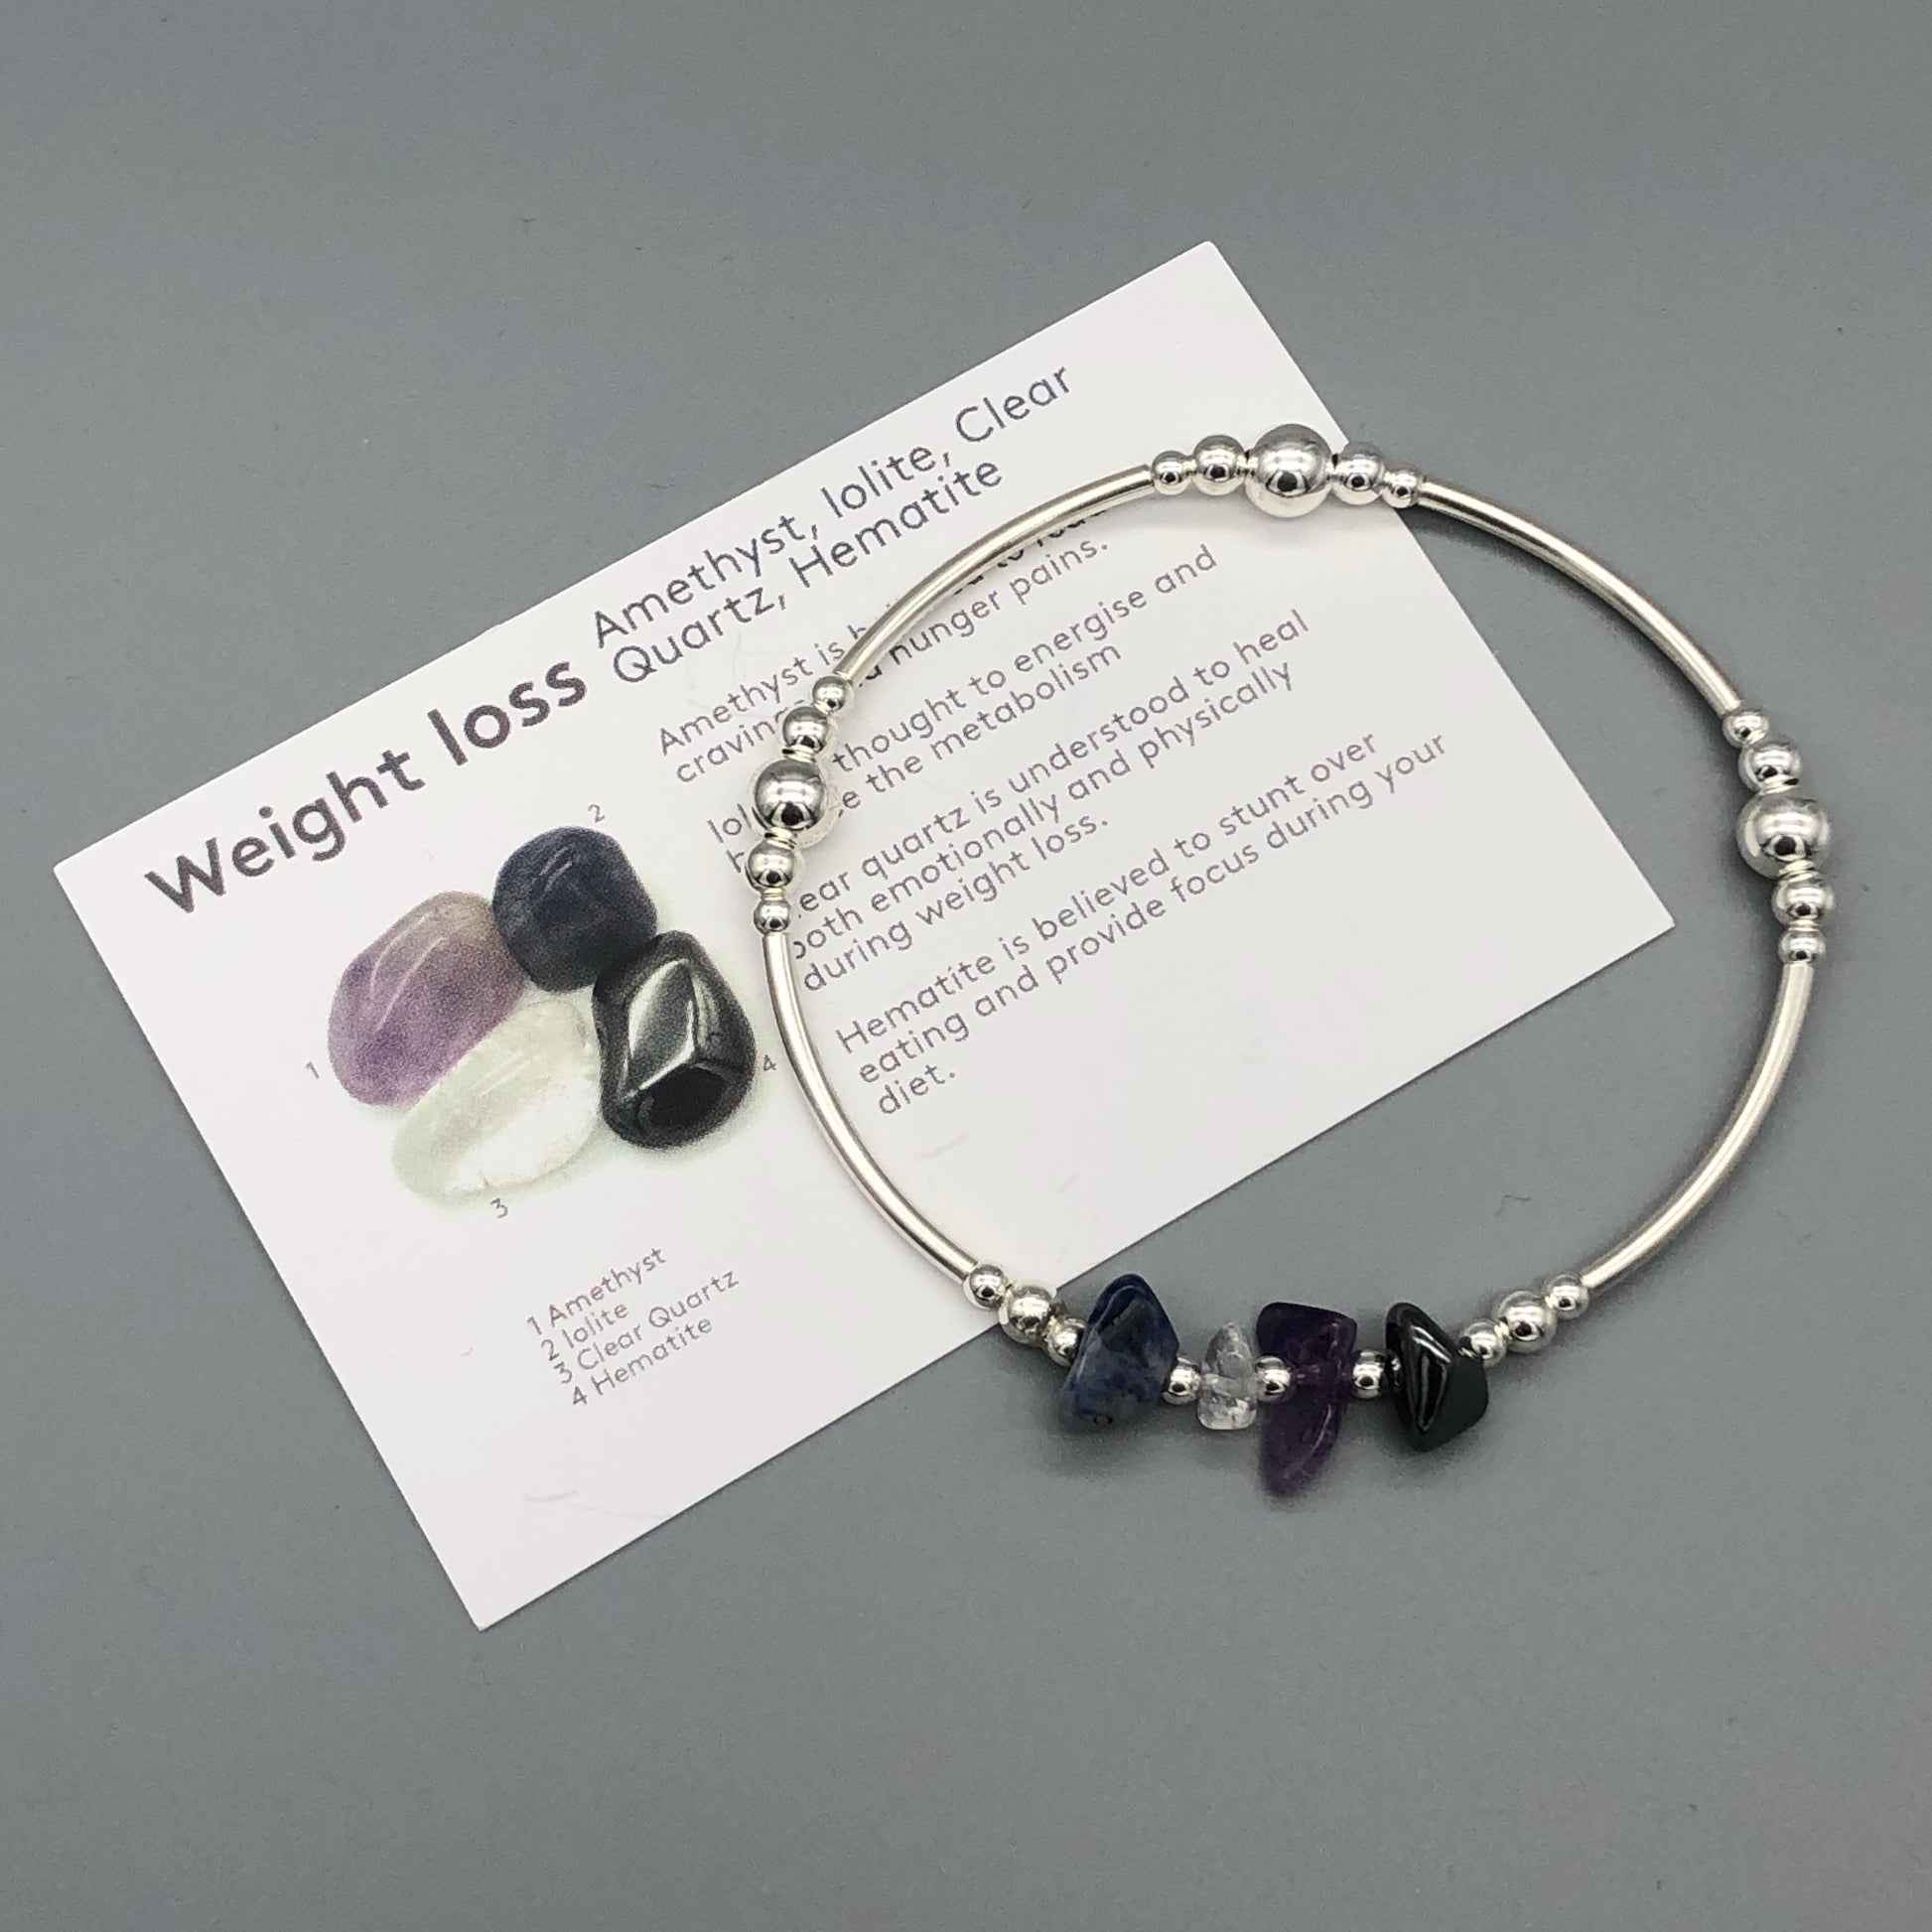 Weight loss healing crystal and sterling silver stacking bracelet by My Silver Wish